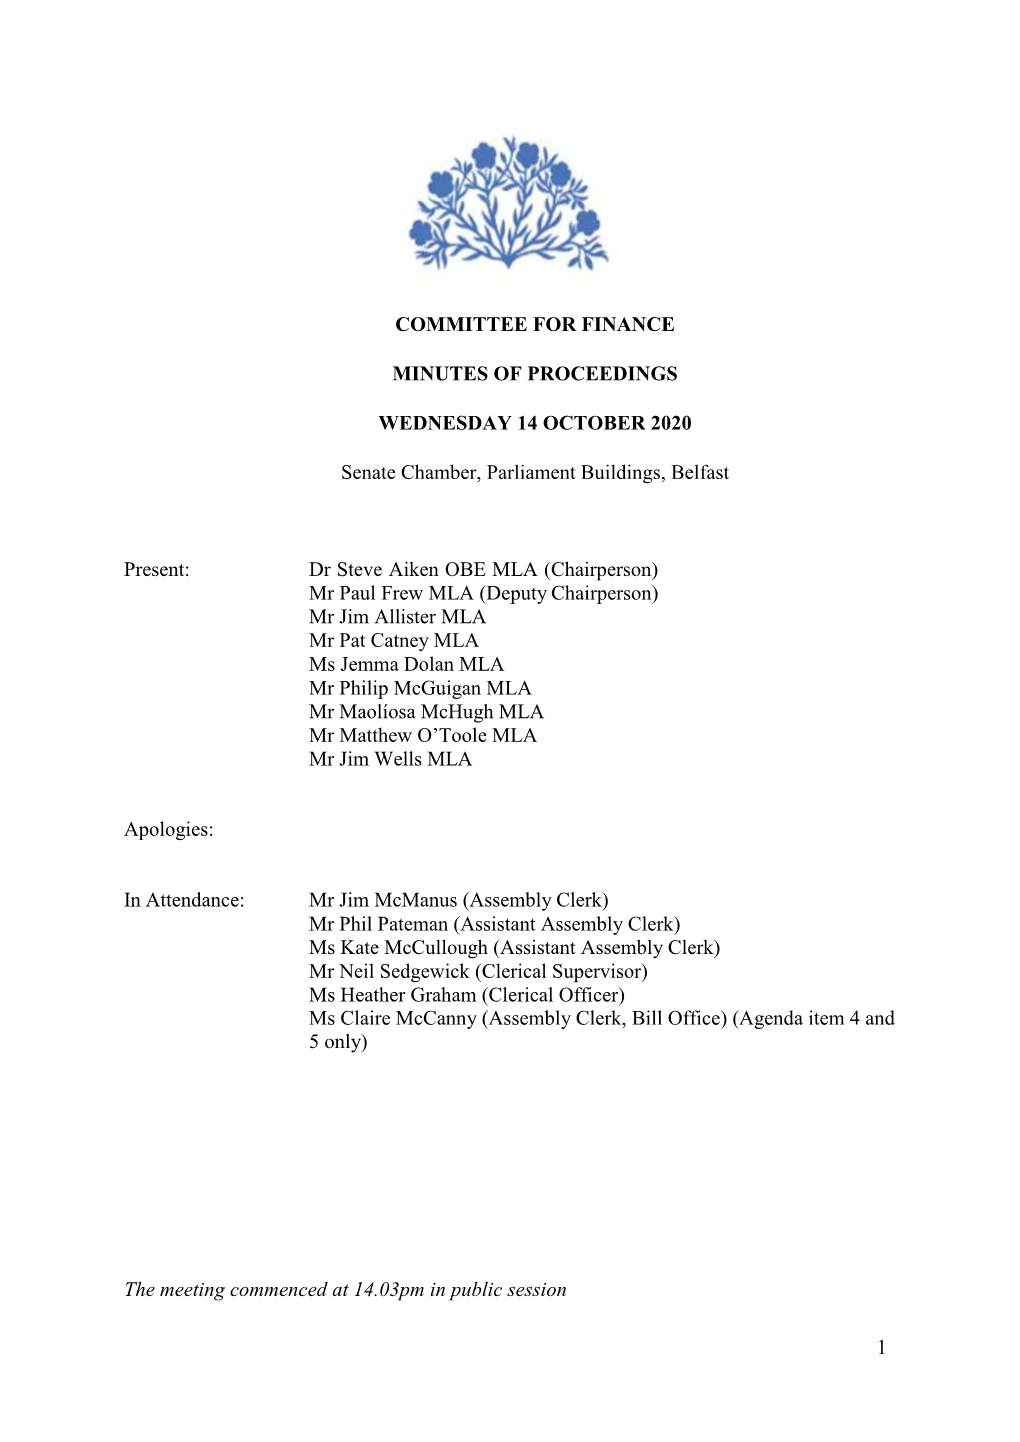 Committee for Finance Minutes of Proceedings 14 October 2020